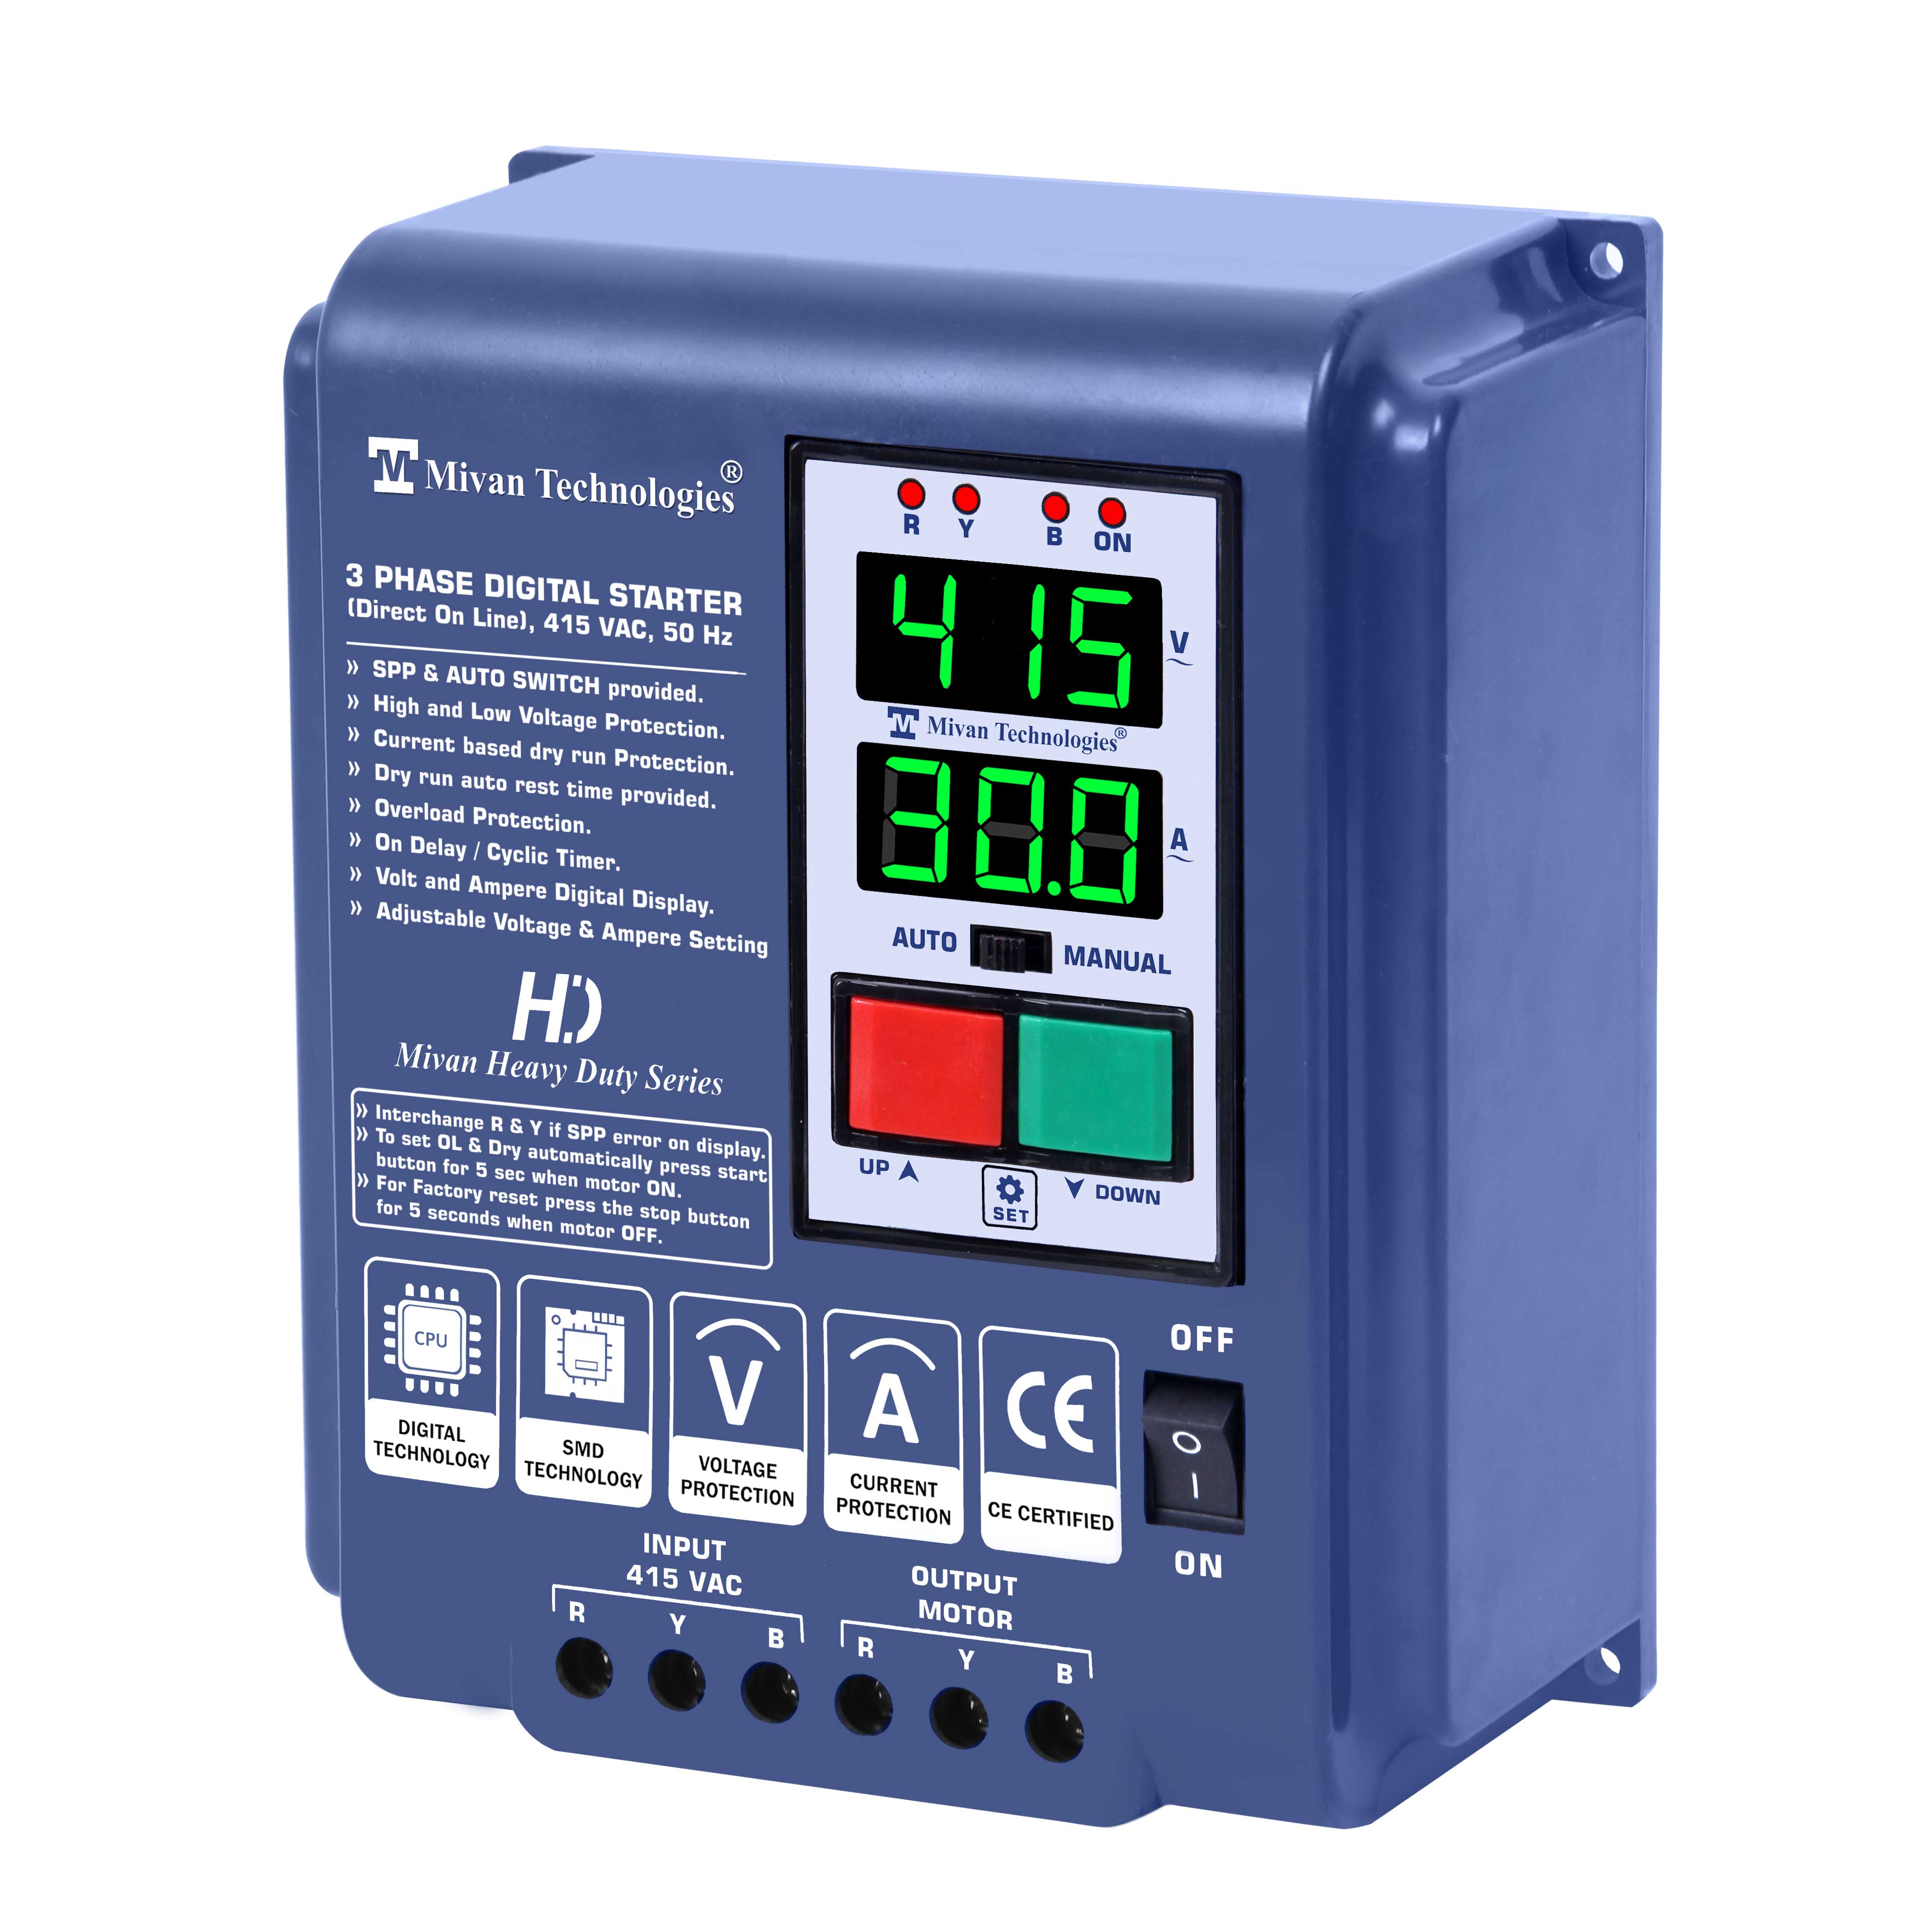 DP 301S 3 Phase DOL Digital Starter for 3 Phase Motor Suitable up to 10 hp Motor with HV LV OL Dry protections with SPP Auto switch and cyclic timer